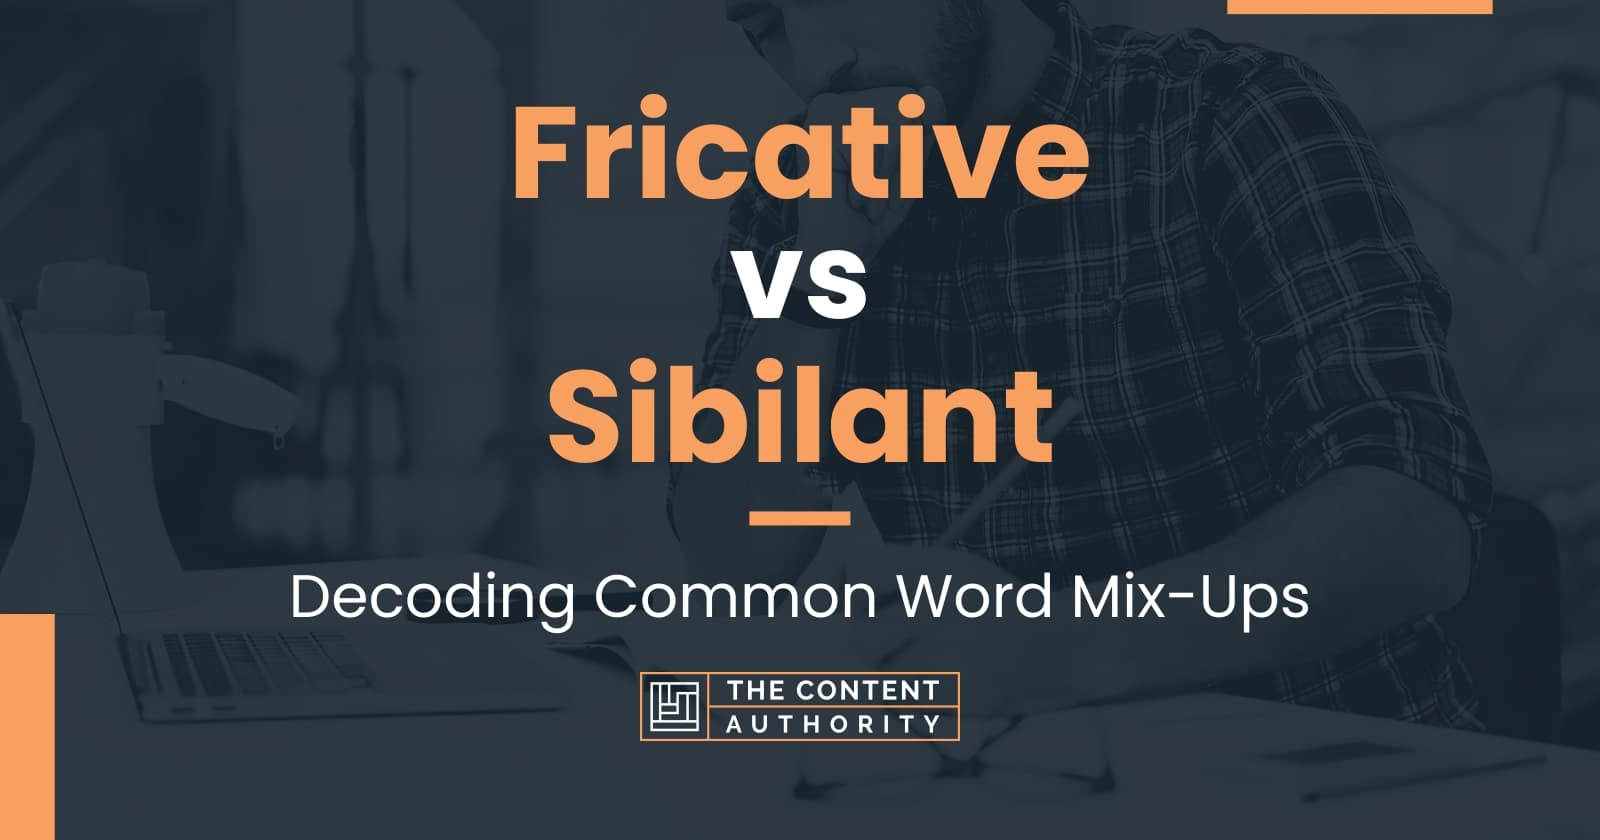 sibilant fricative essays and reviews